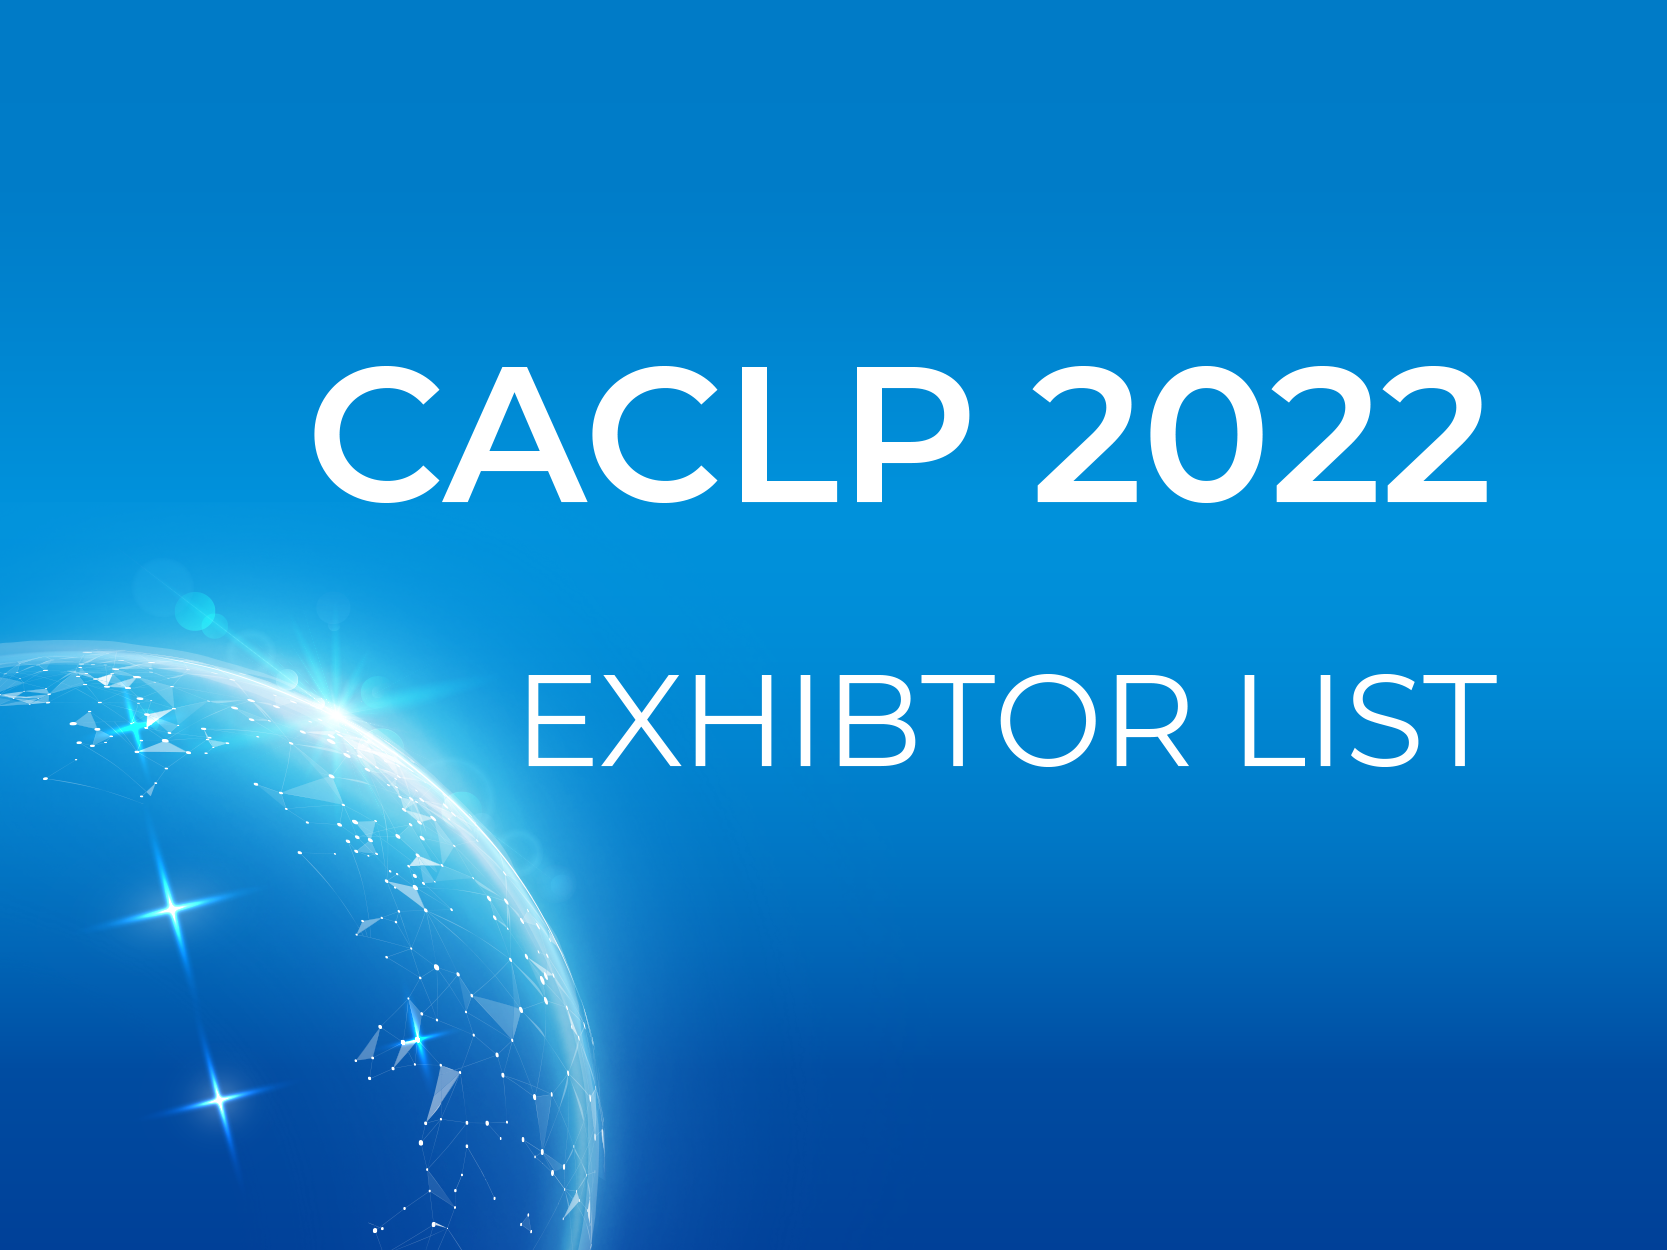 EXHIBITOR LIST OF CACLP 2022 (Updated to 16 Aug.)